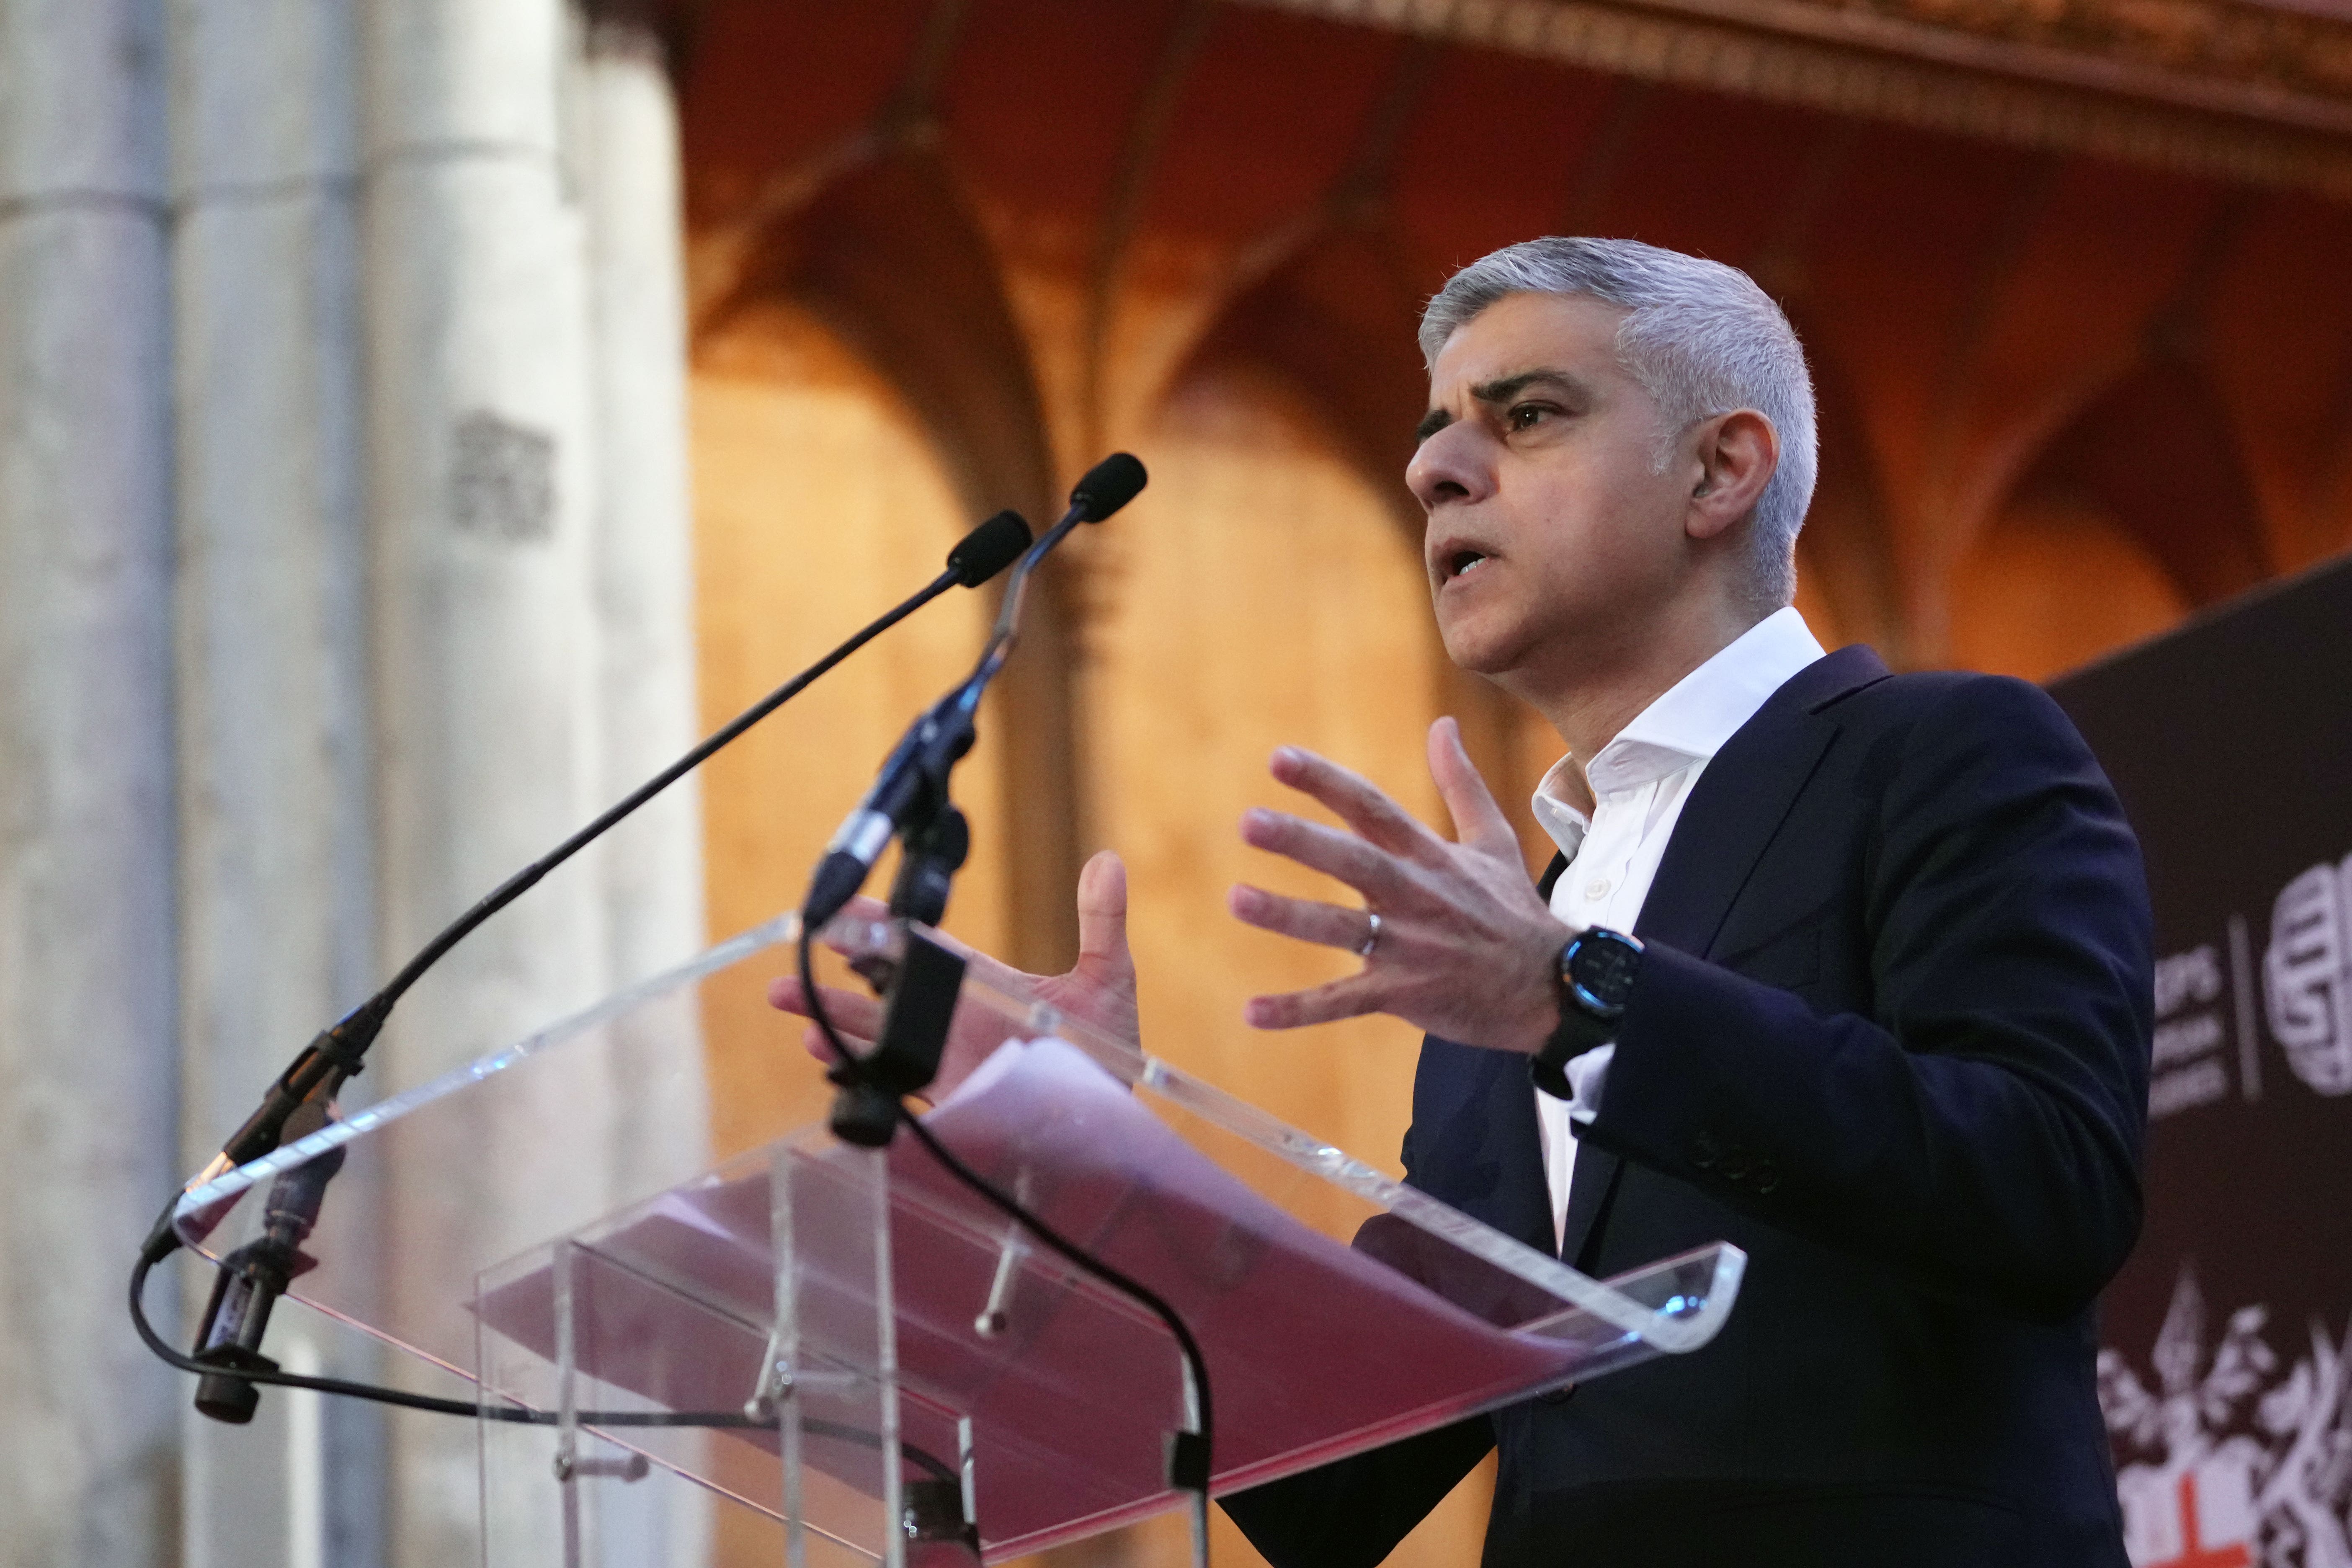 Sadiq Khan giving a speech to the Fabian Society conference on Saturday